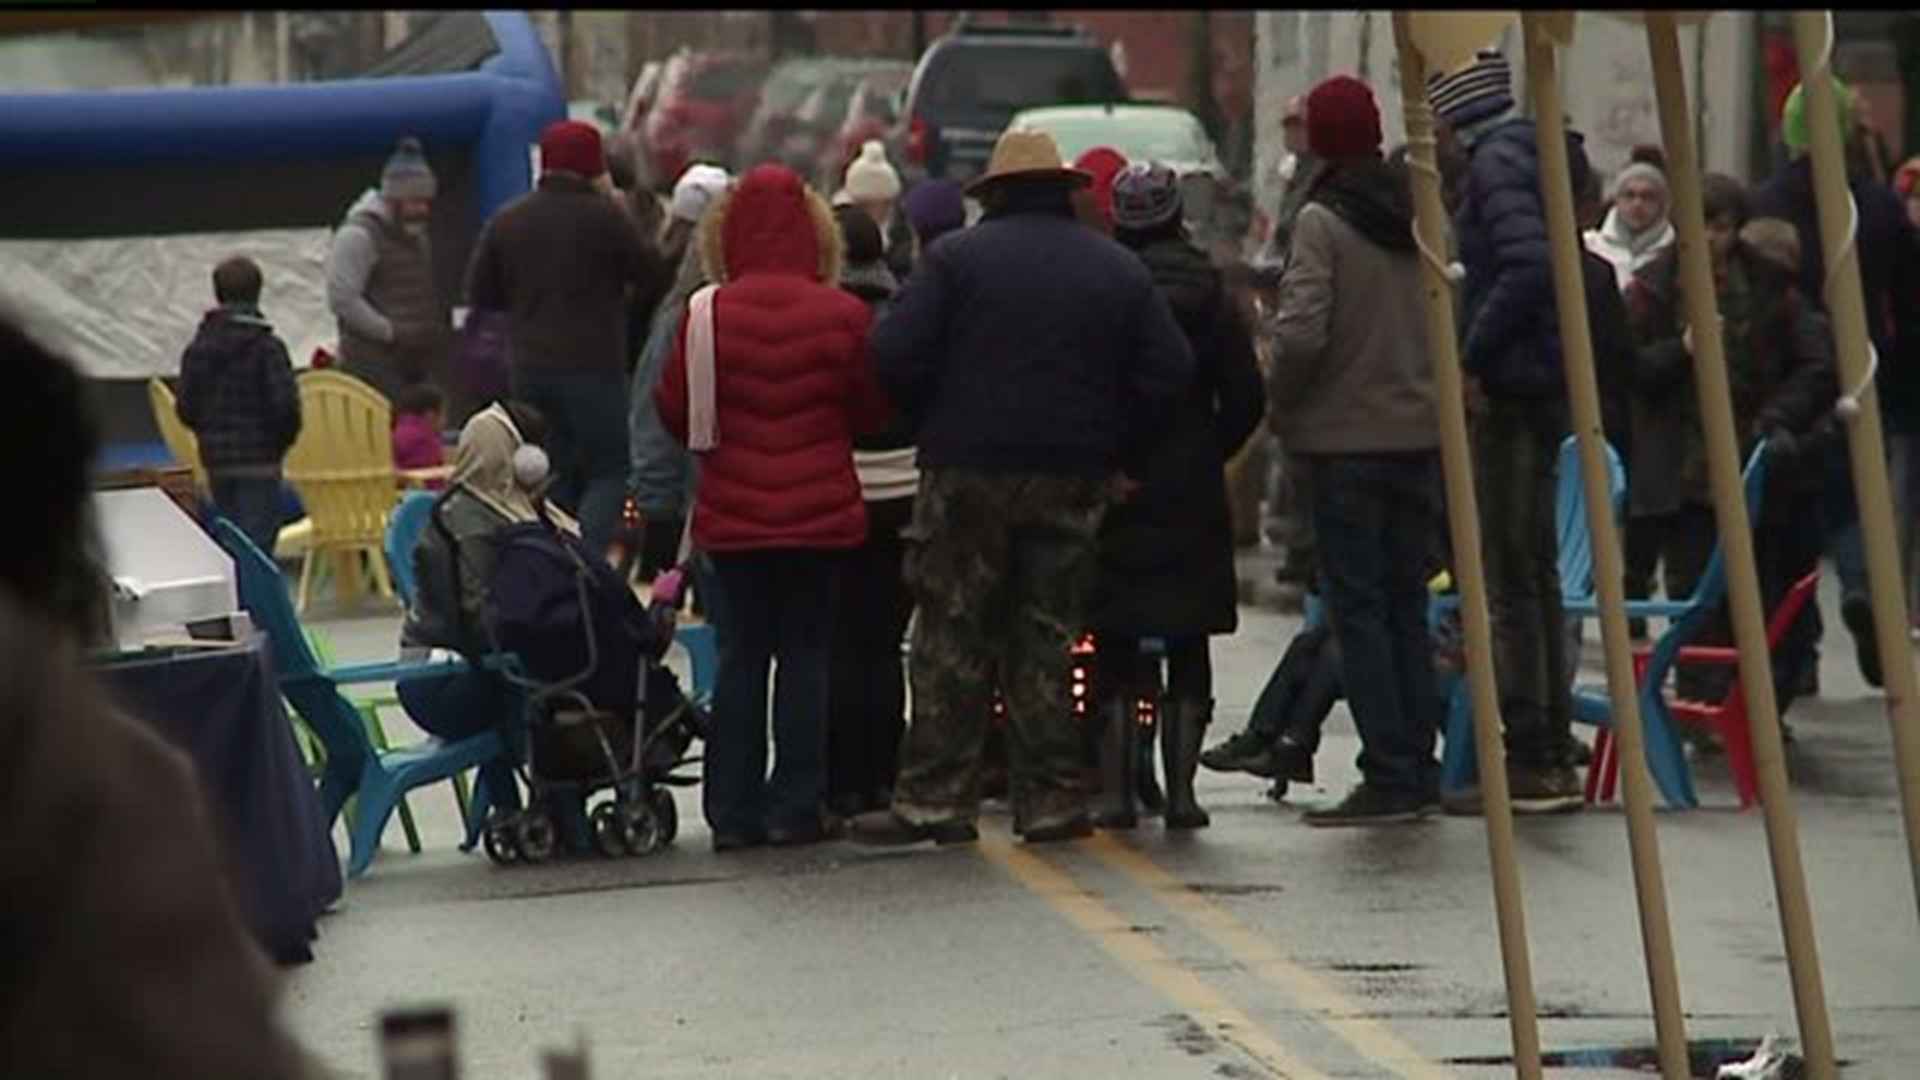 Crowds pack the annual festiv-ice event